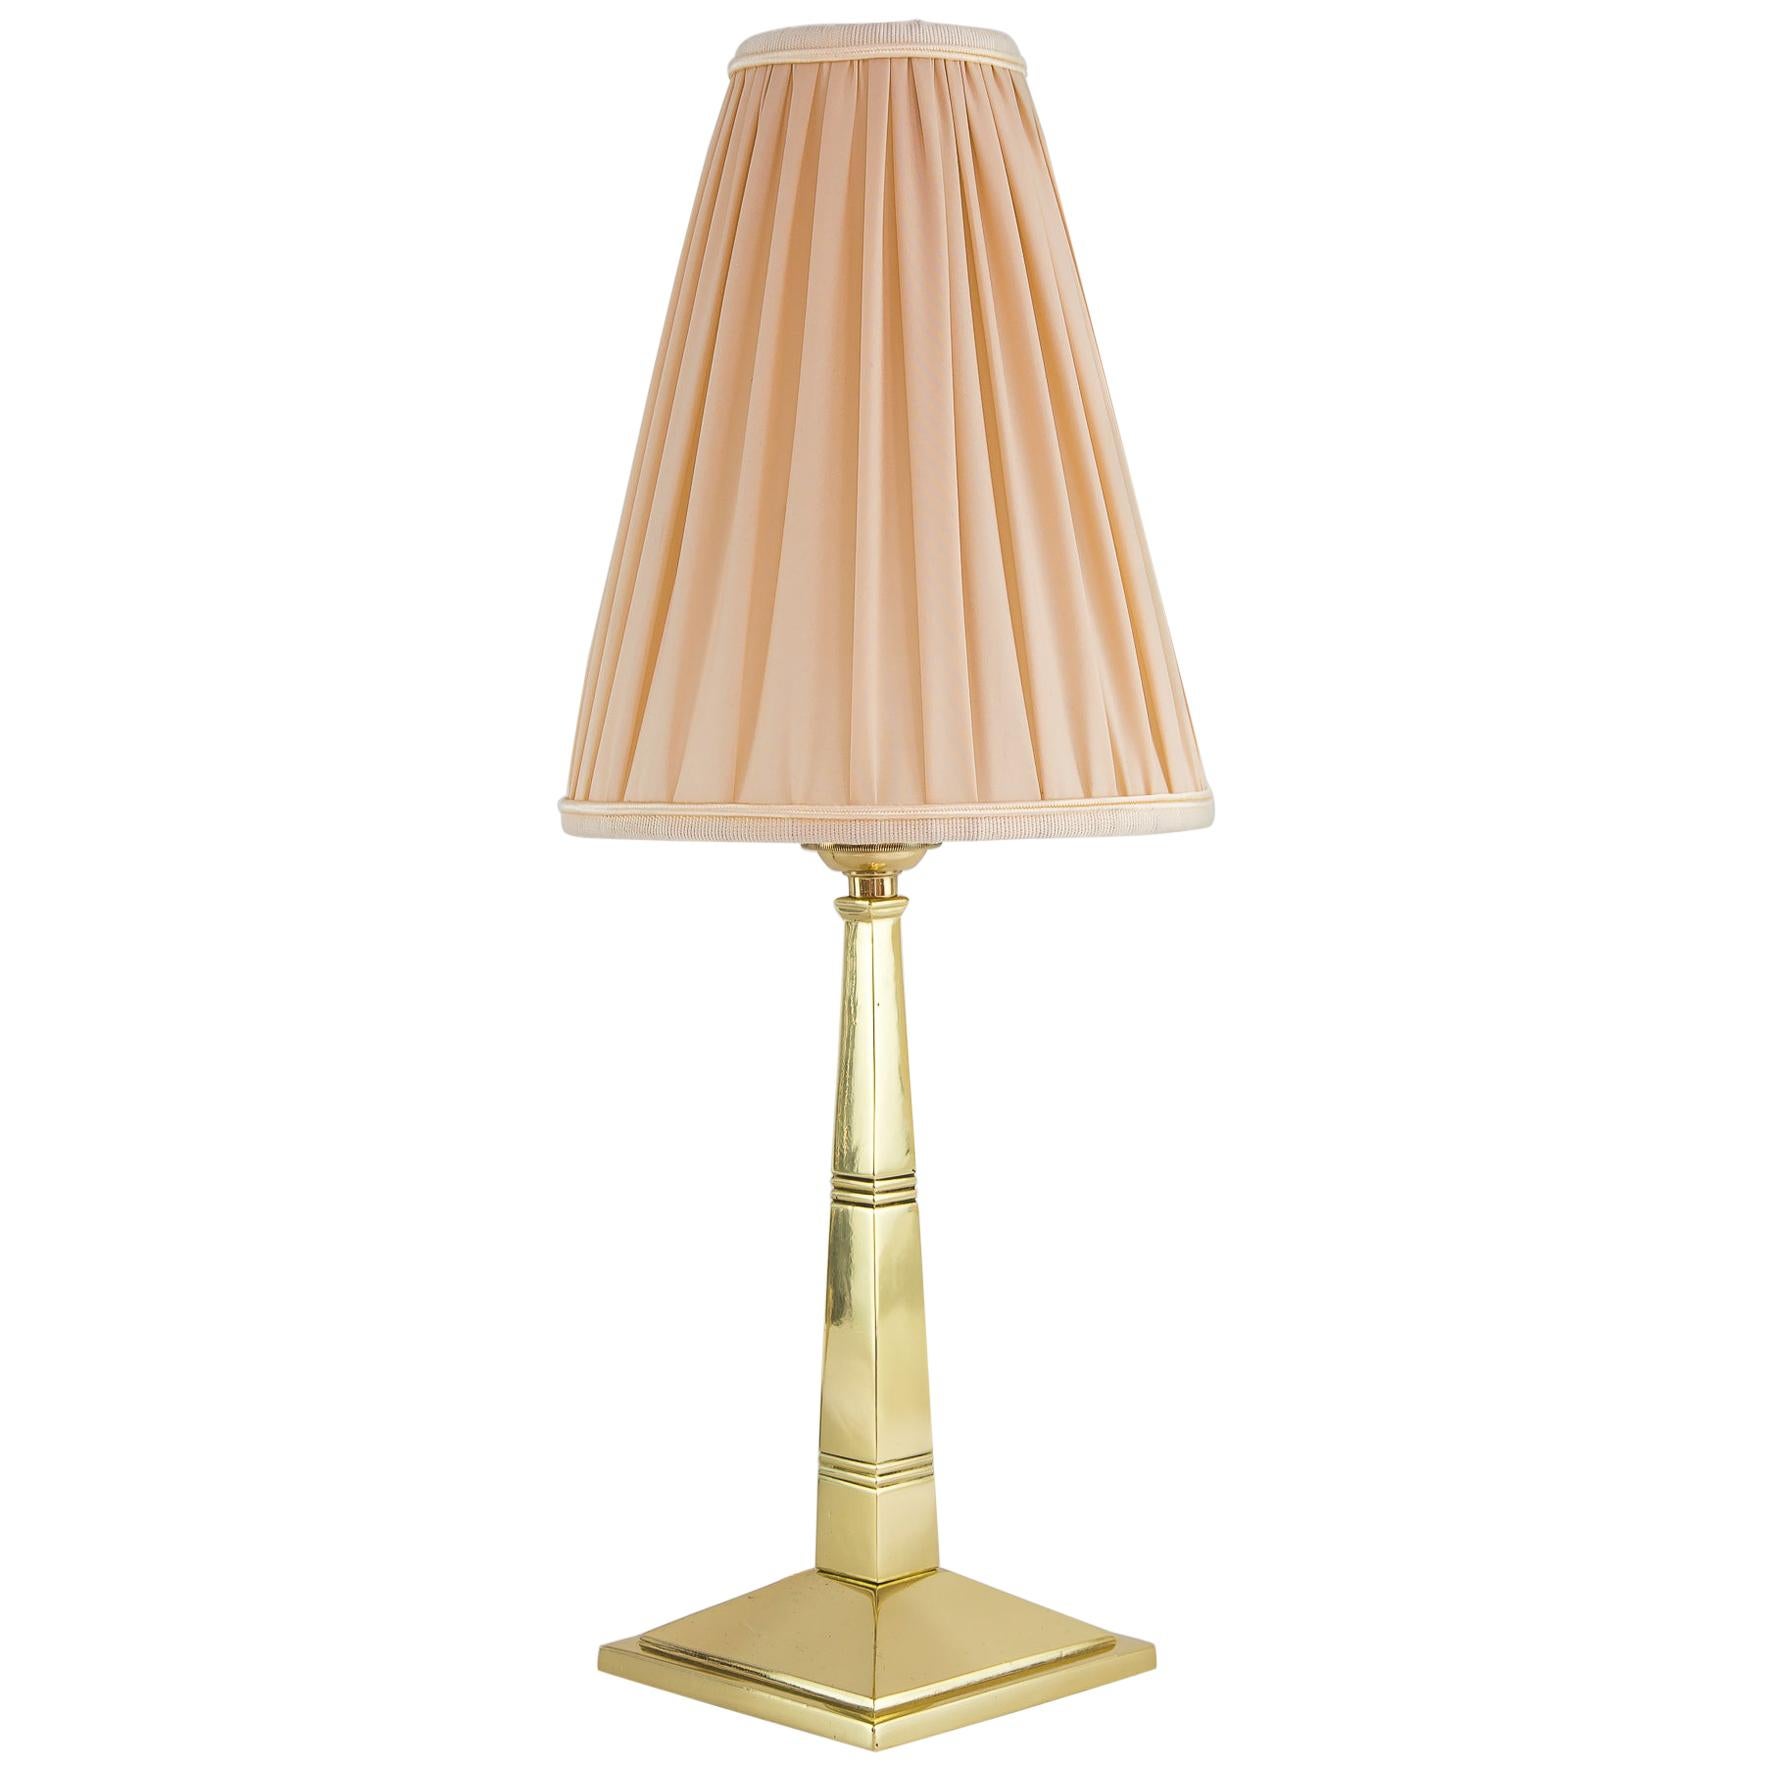 Art Deco Table Lamp Vienna circa 1920s with Fabric Shade For Sale